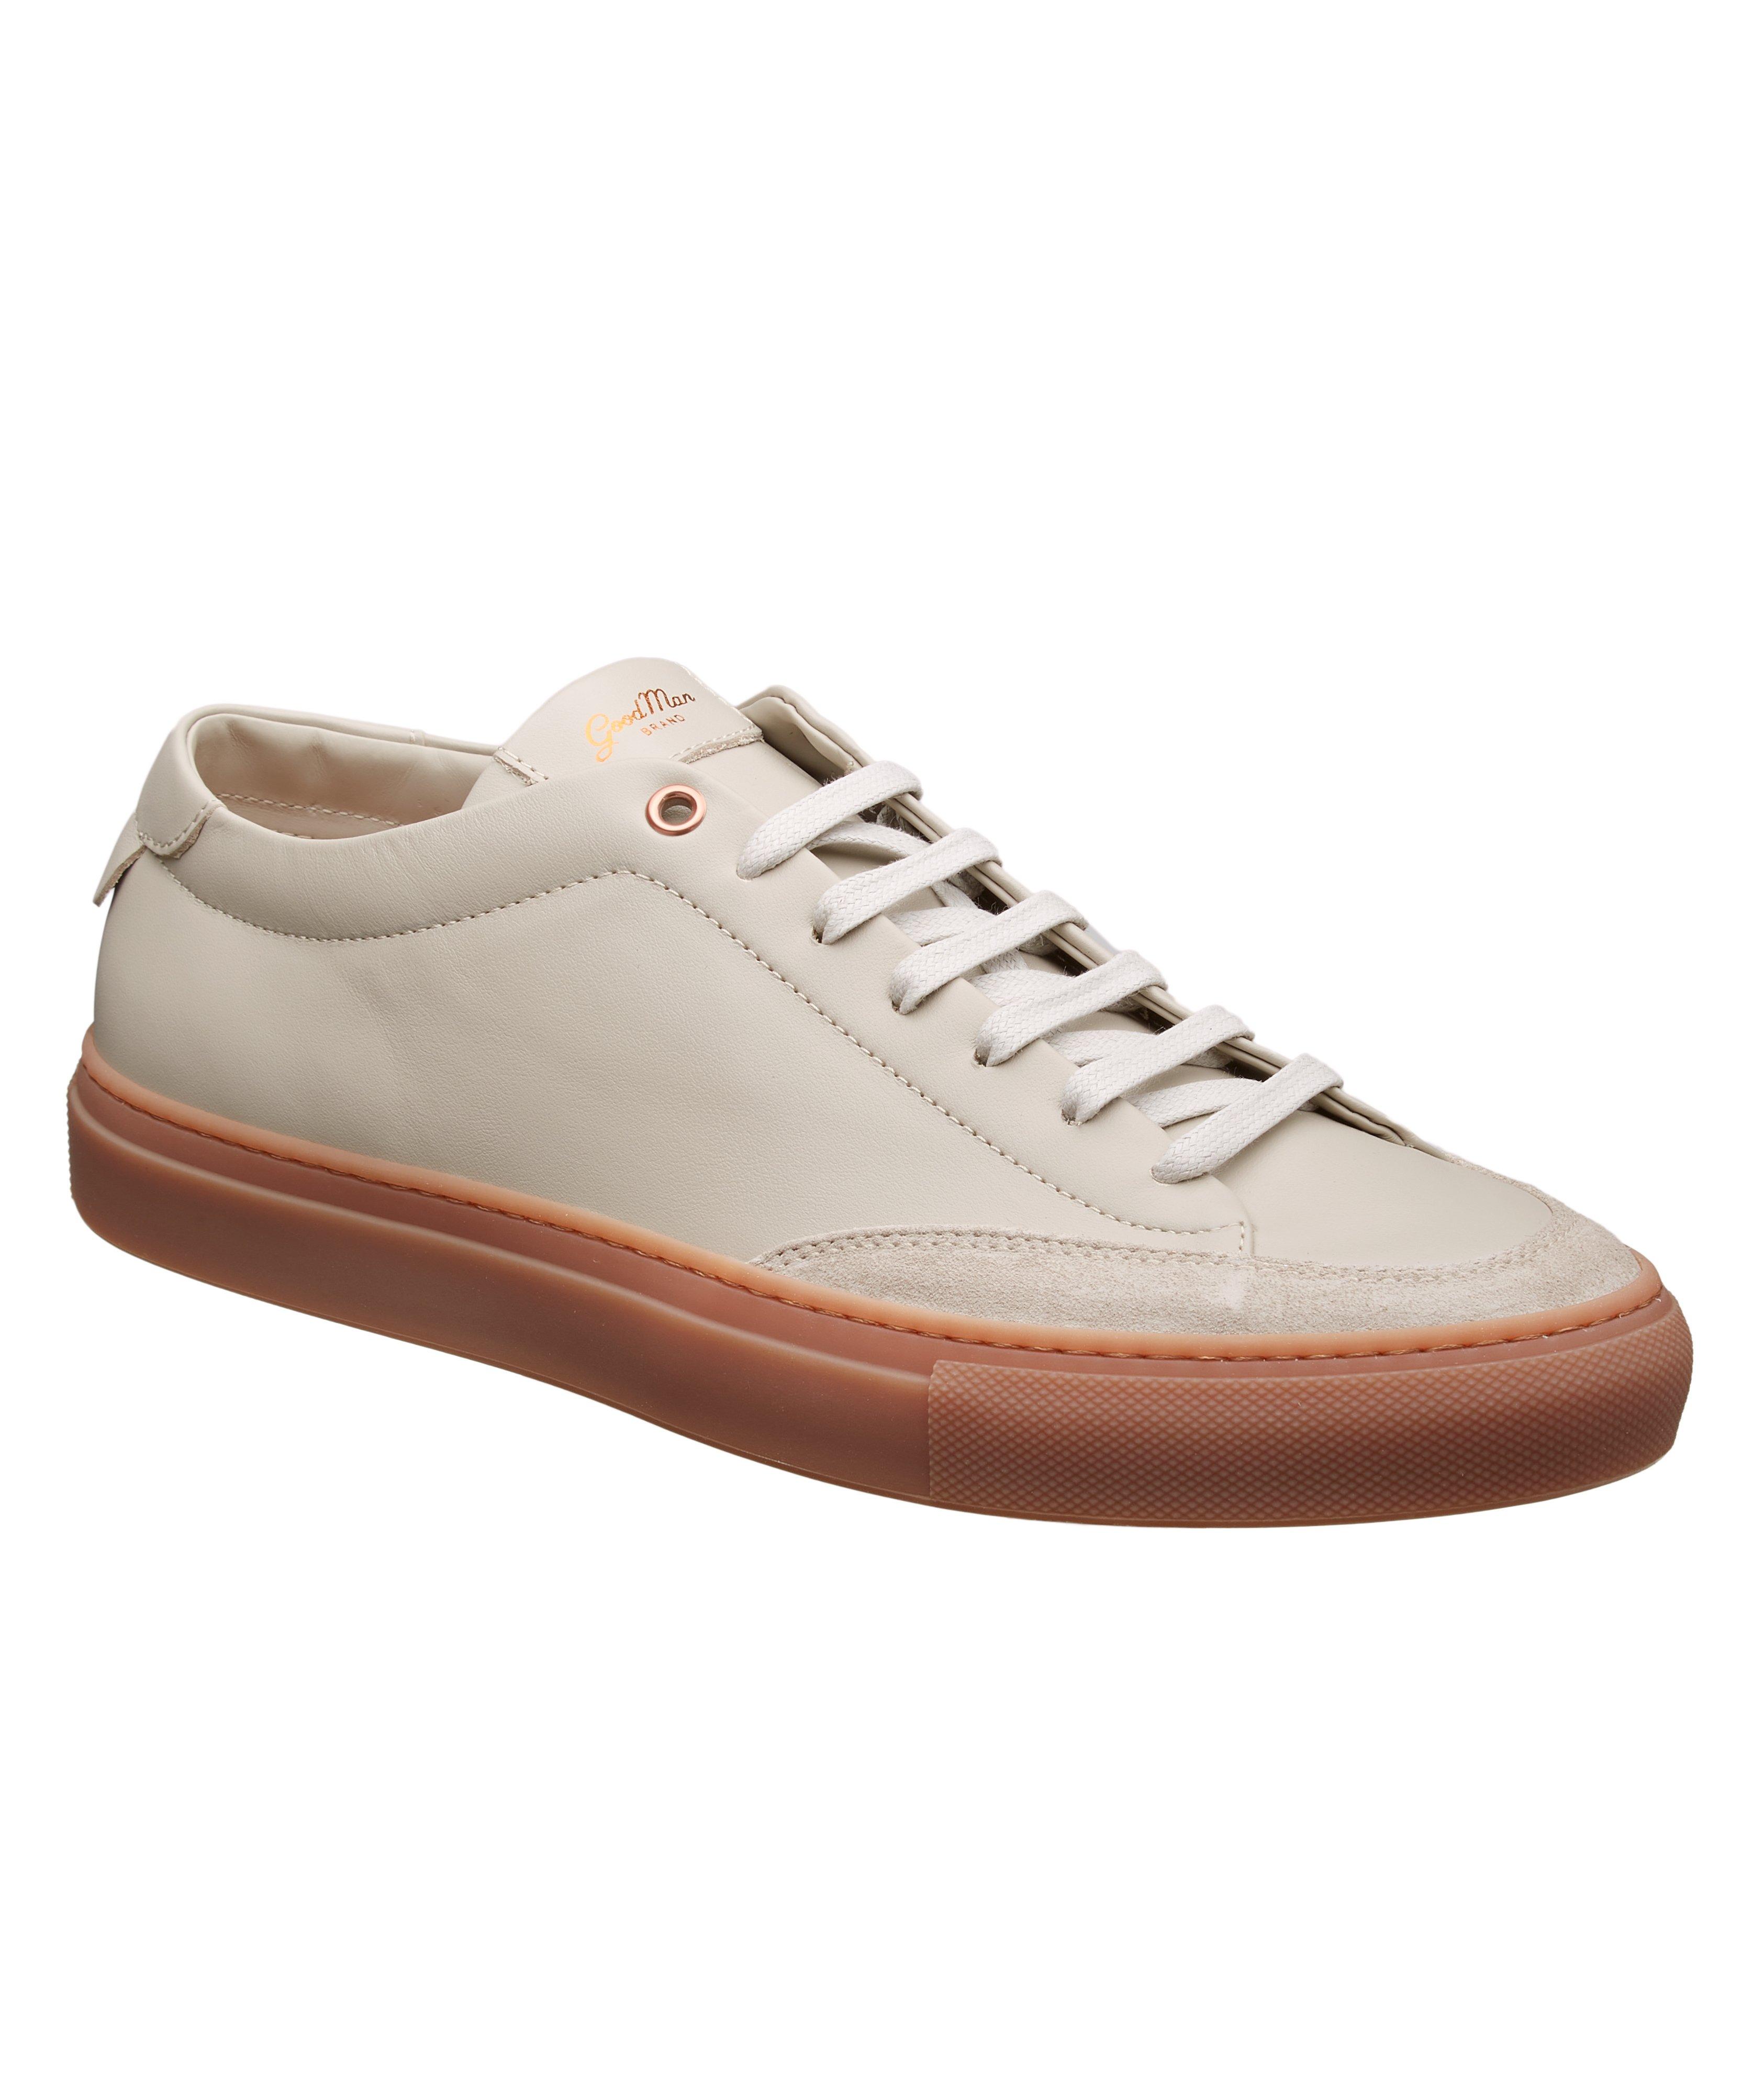 Edge Court Leather Sneakers image 0